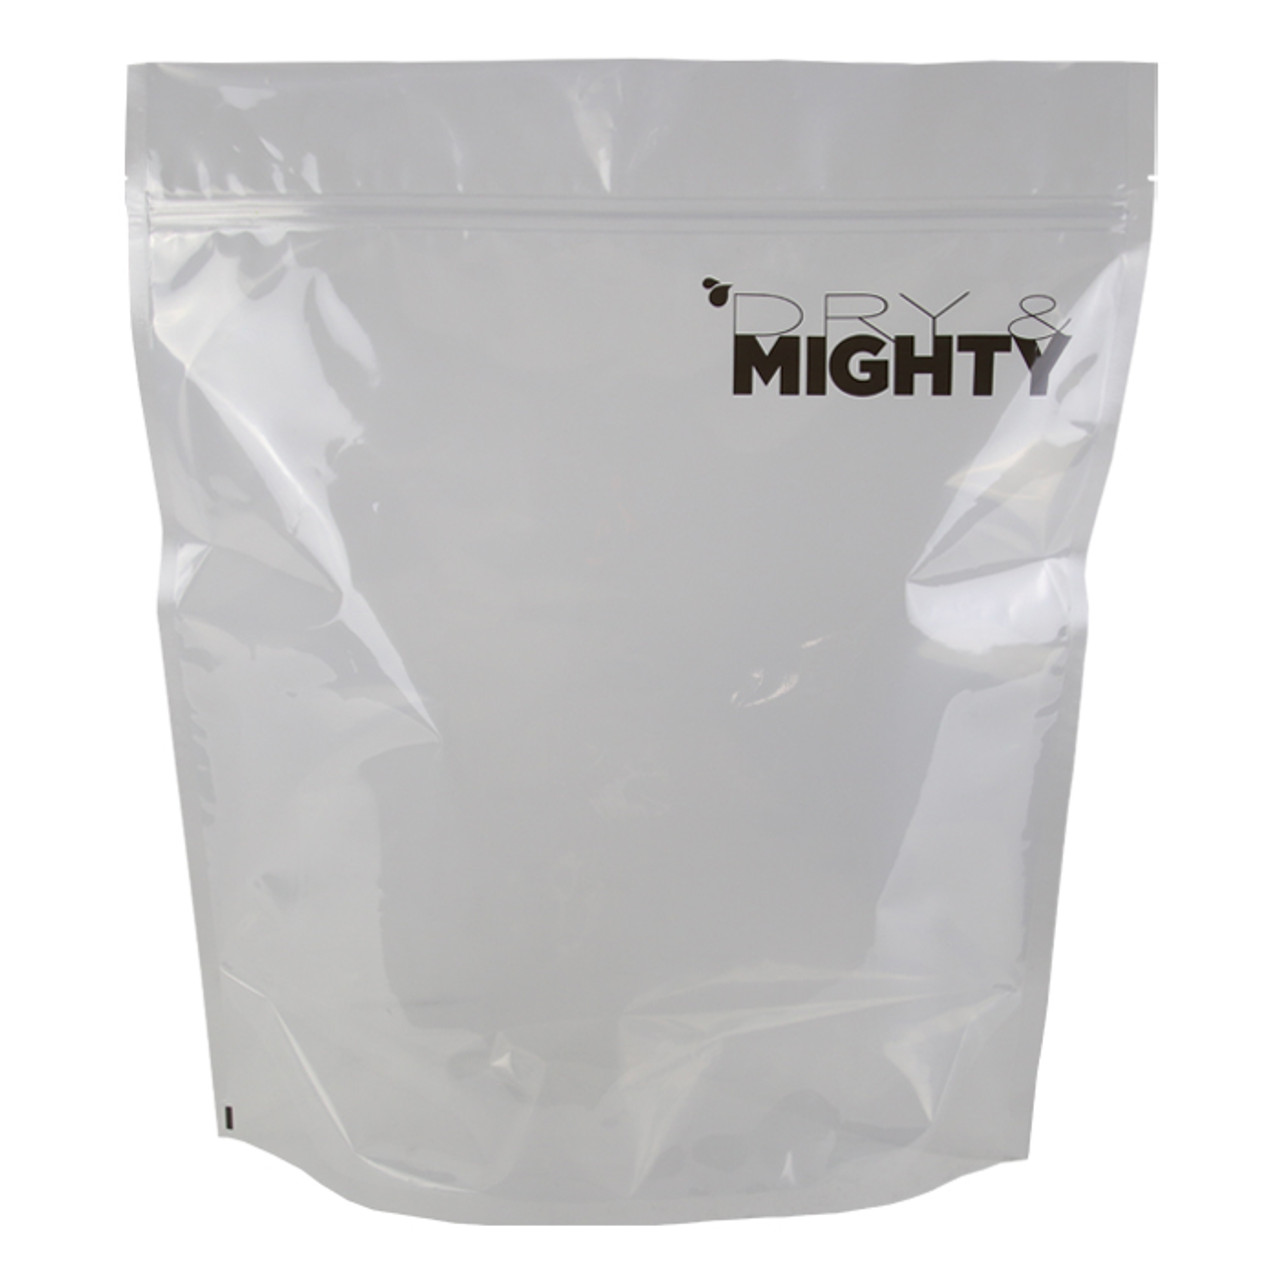 Dry & Mighty Bag X-Large (25 p